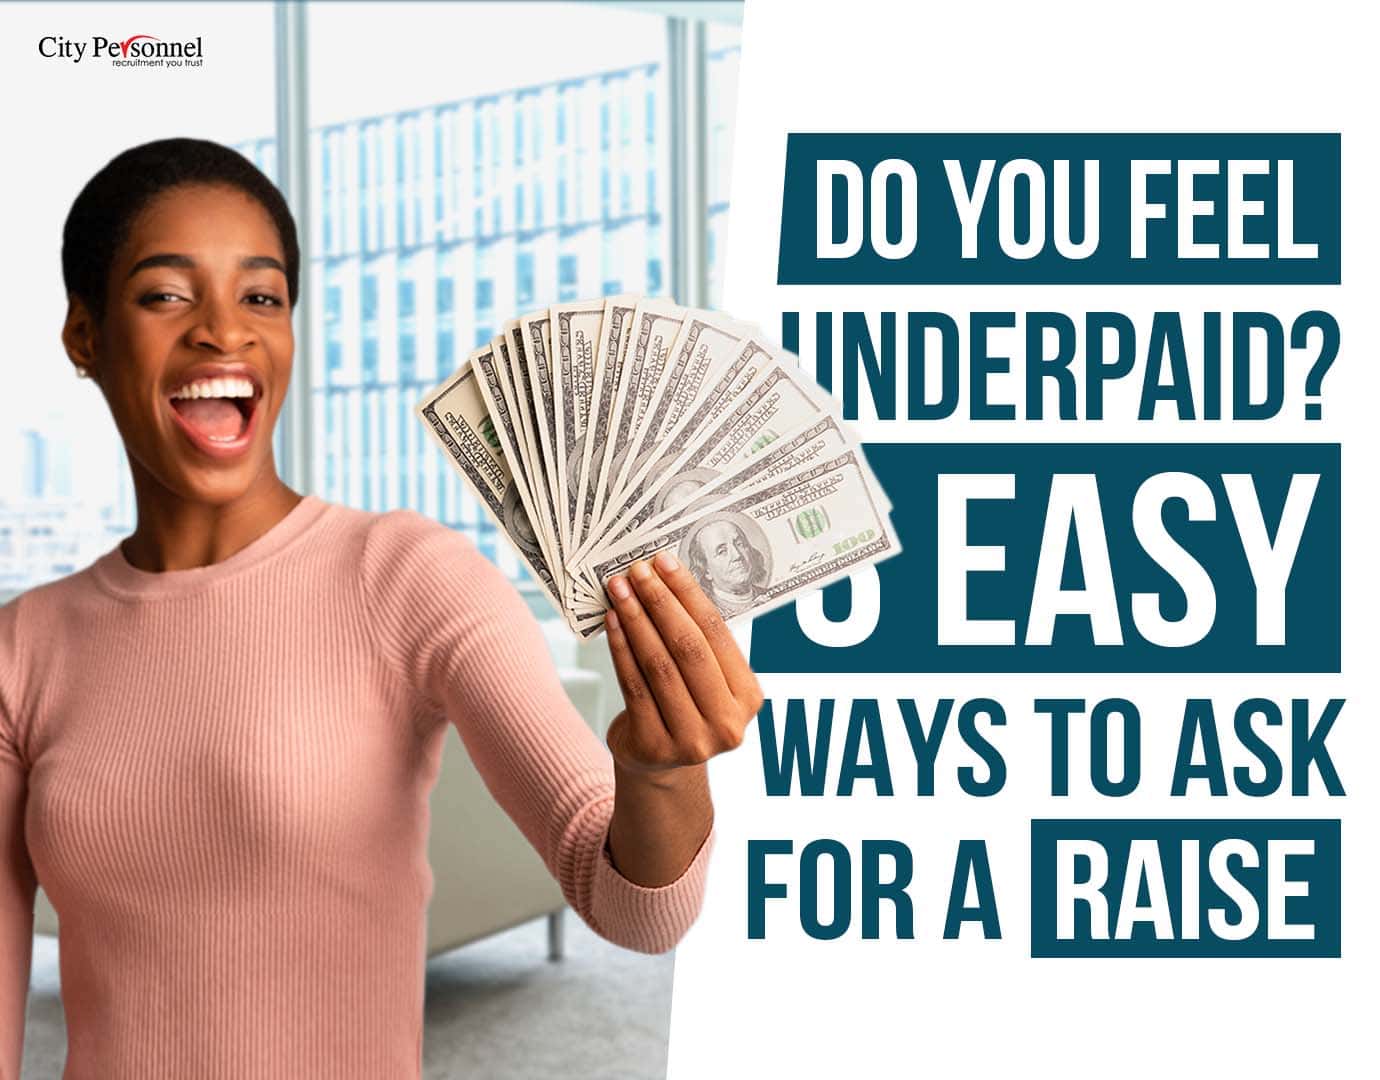 Easy ways to Ask for a Raise